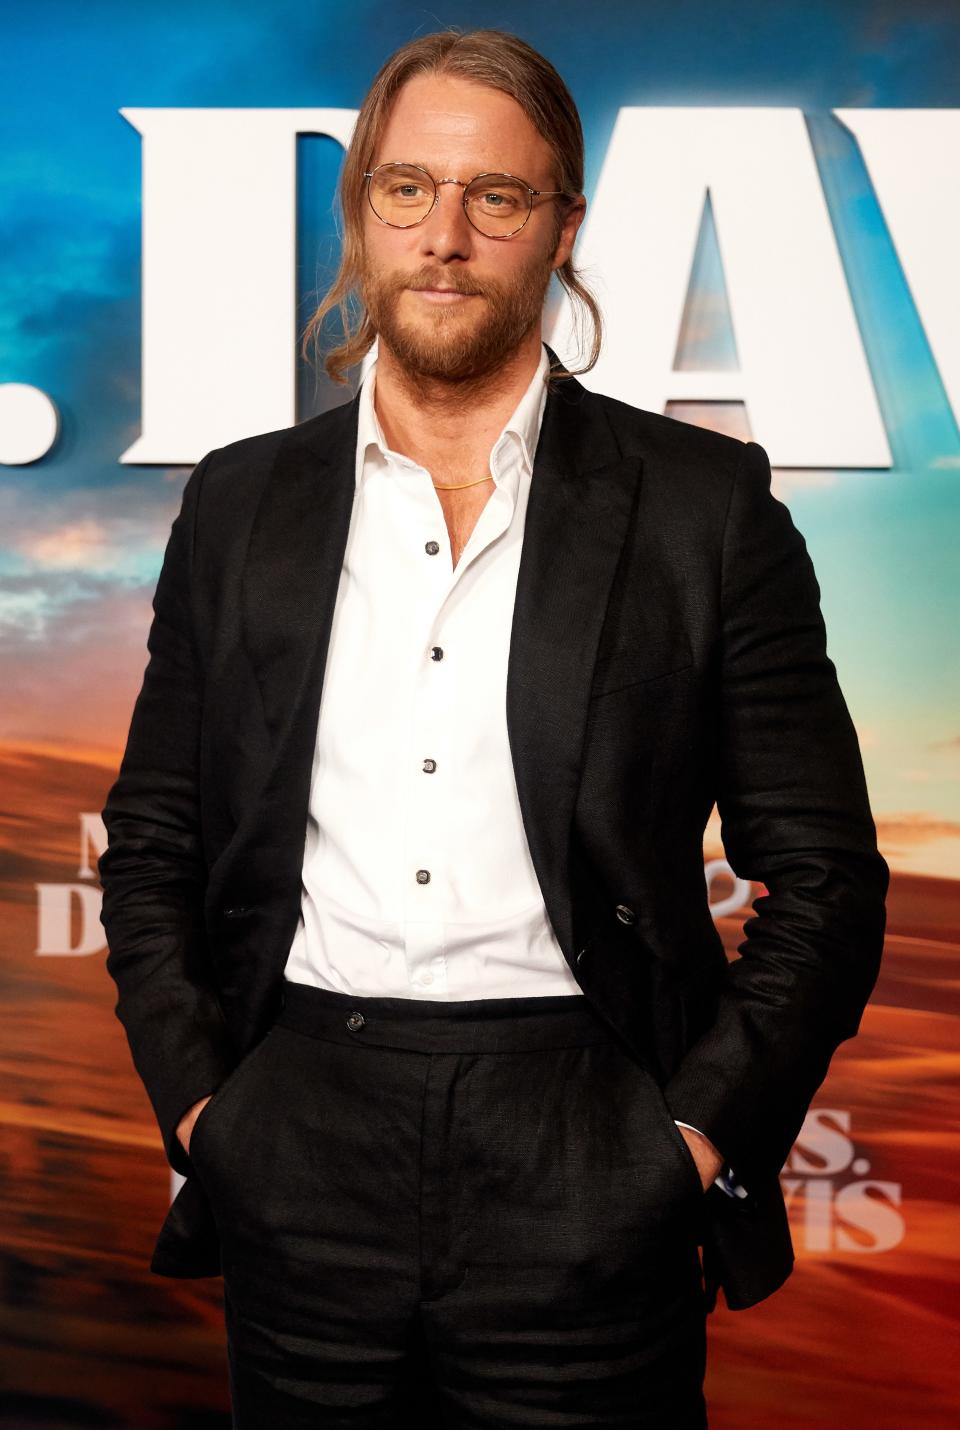 long hair tied back in a ponytail with a short beard and mustache and wearing glasses and a suit